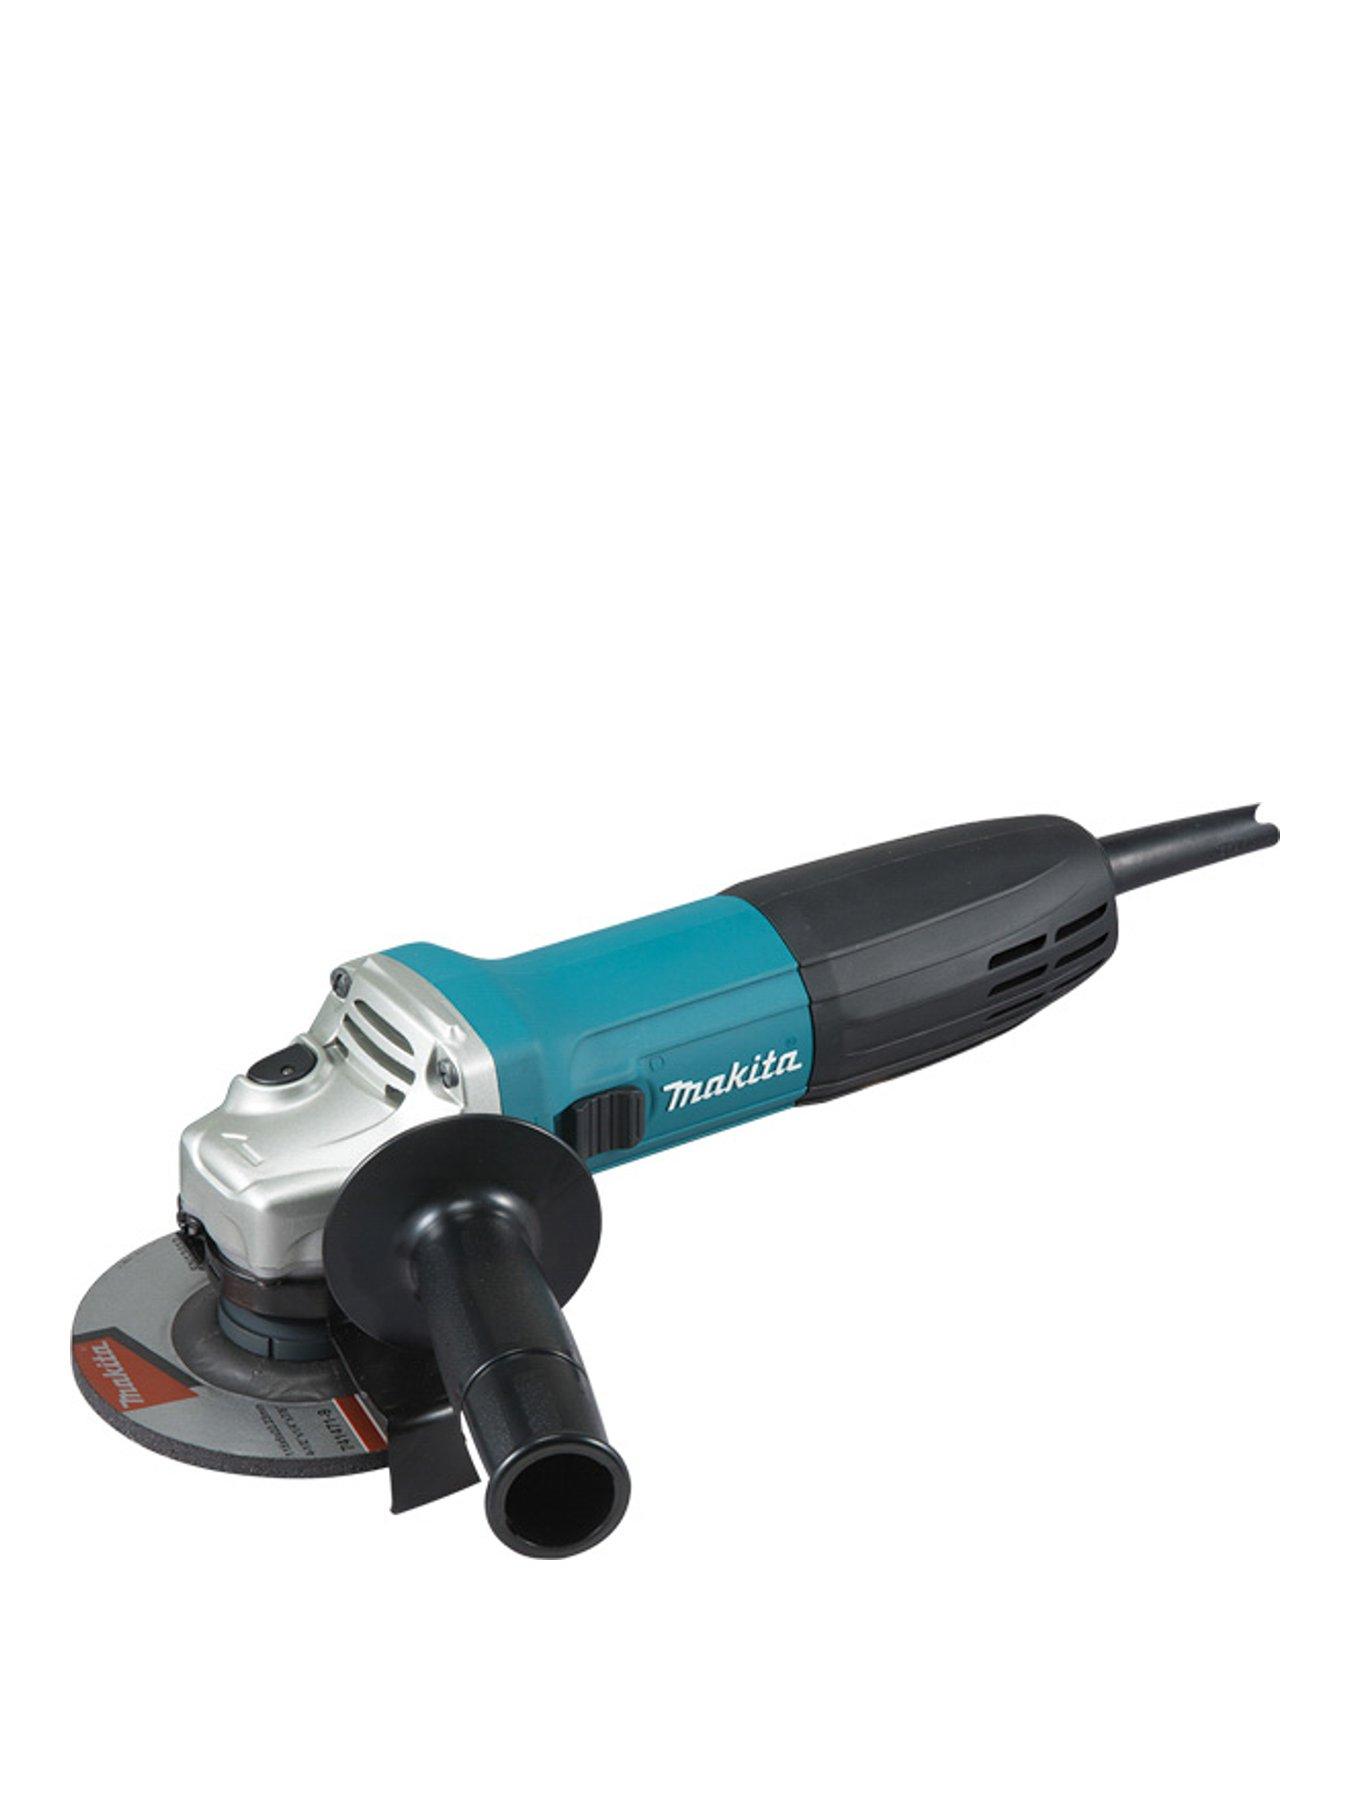 Black and Decker BEG010A5 Angle Grinder Review